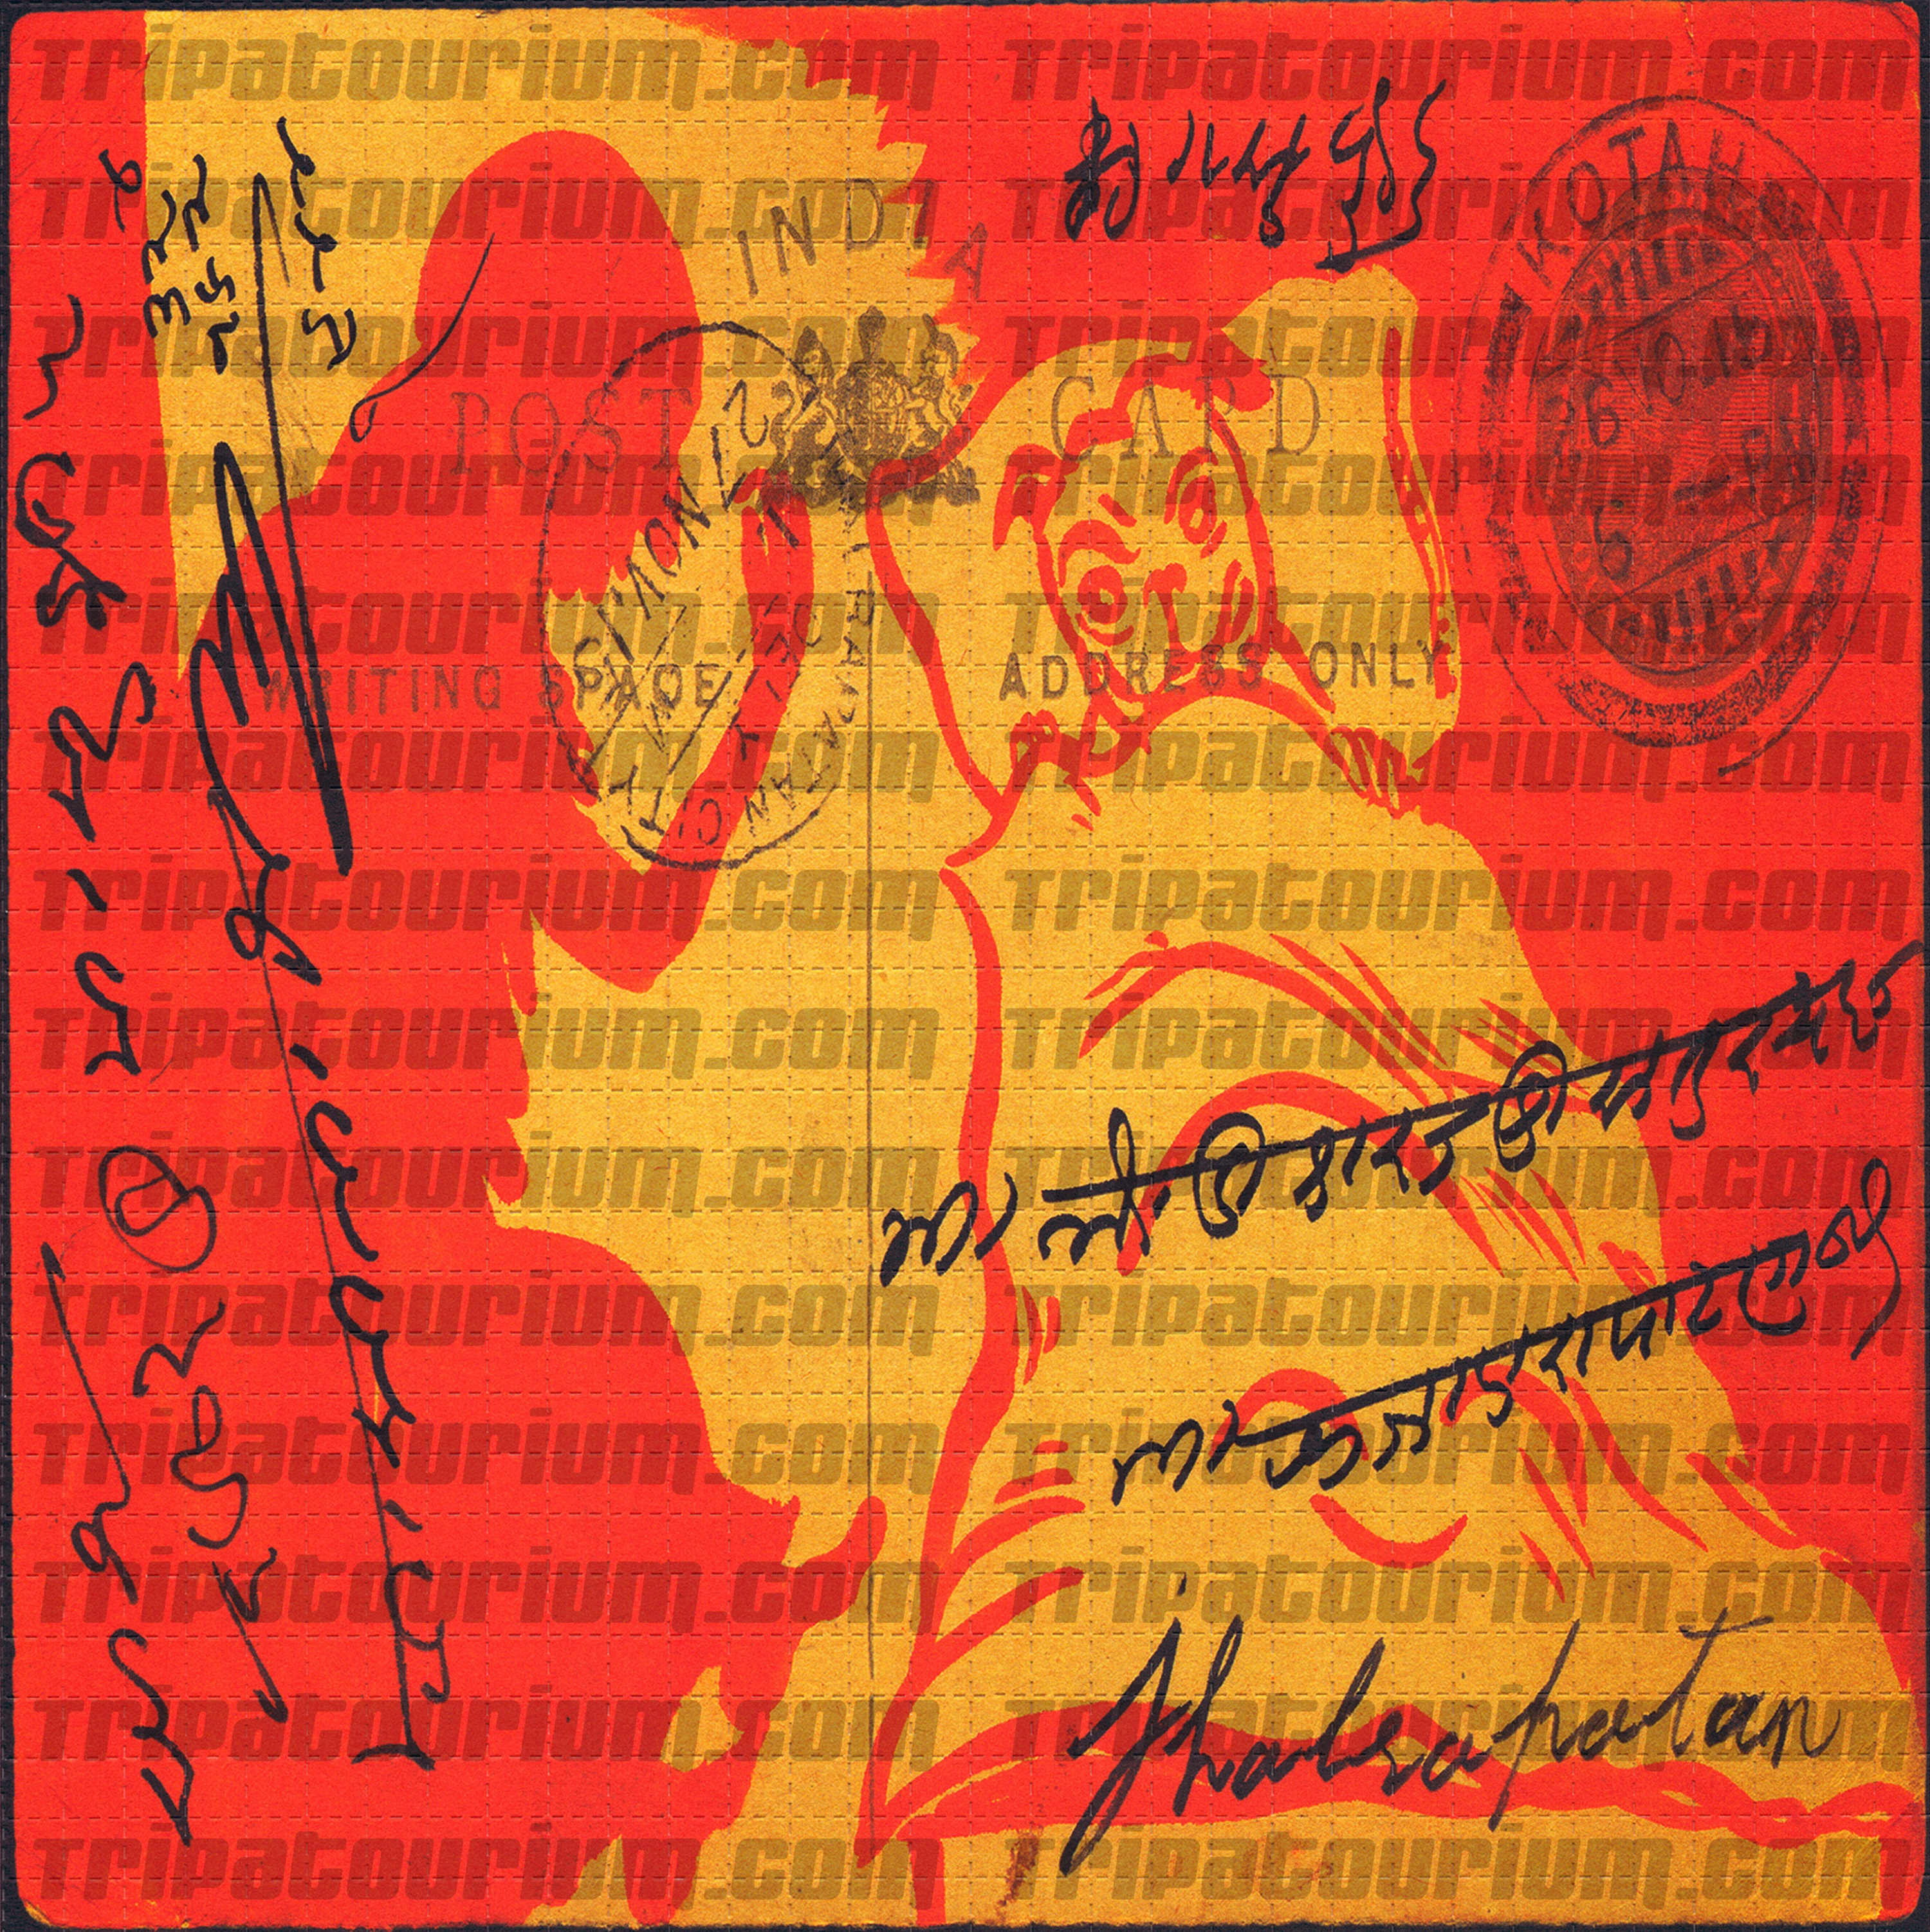 A scan of the LSD Blotter Art Print The Wise Man Consults the Invalid Finky by Mark Mothersbaugh